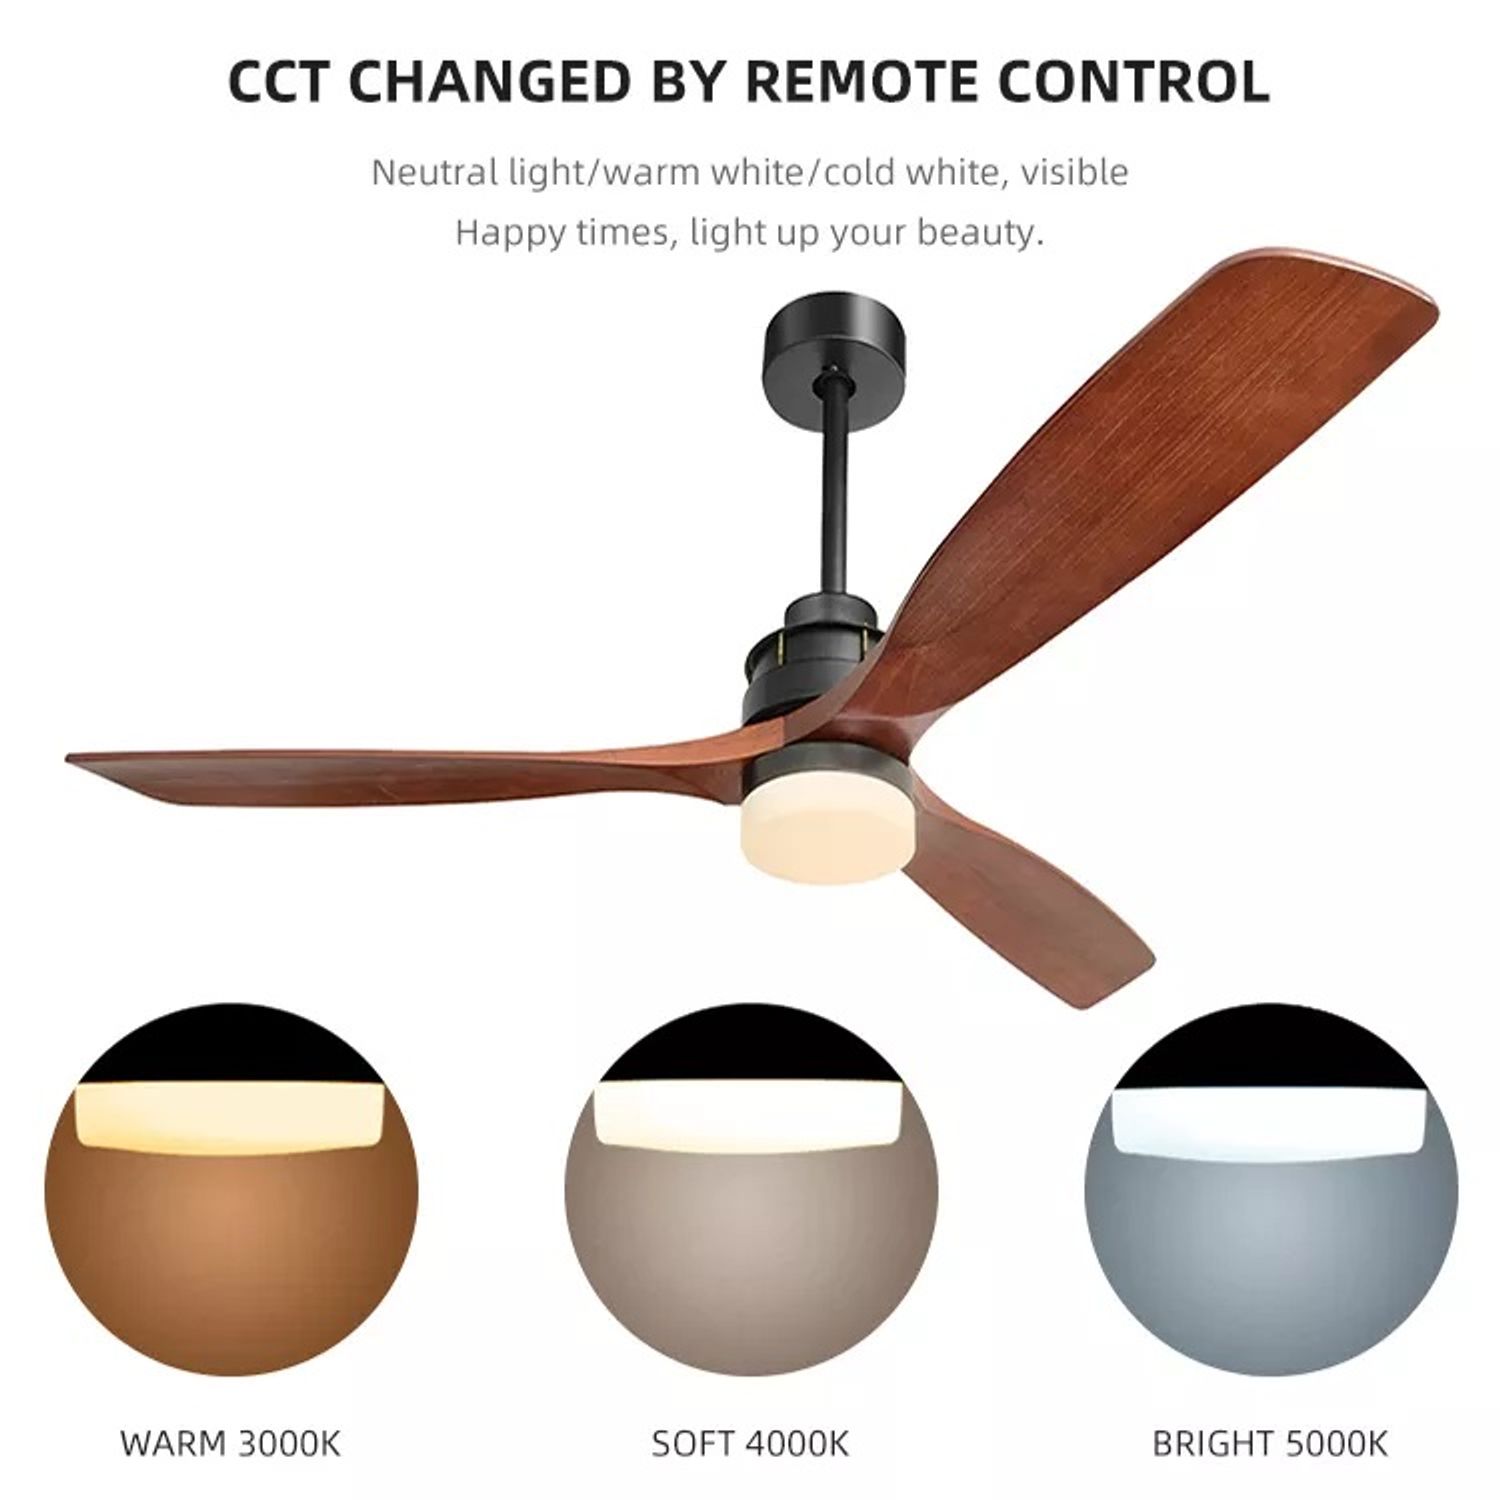 CCT changed by KBS wood ceiling fan remote control